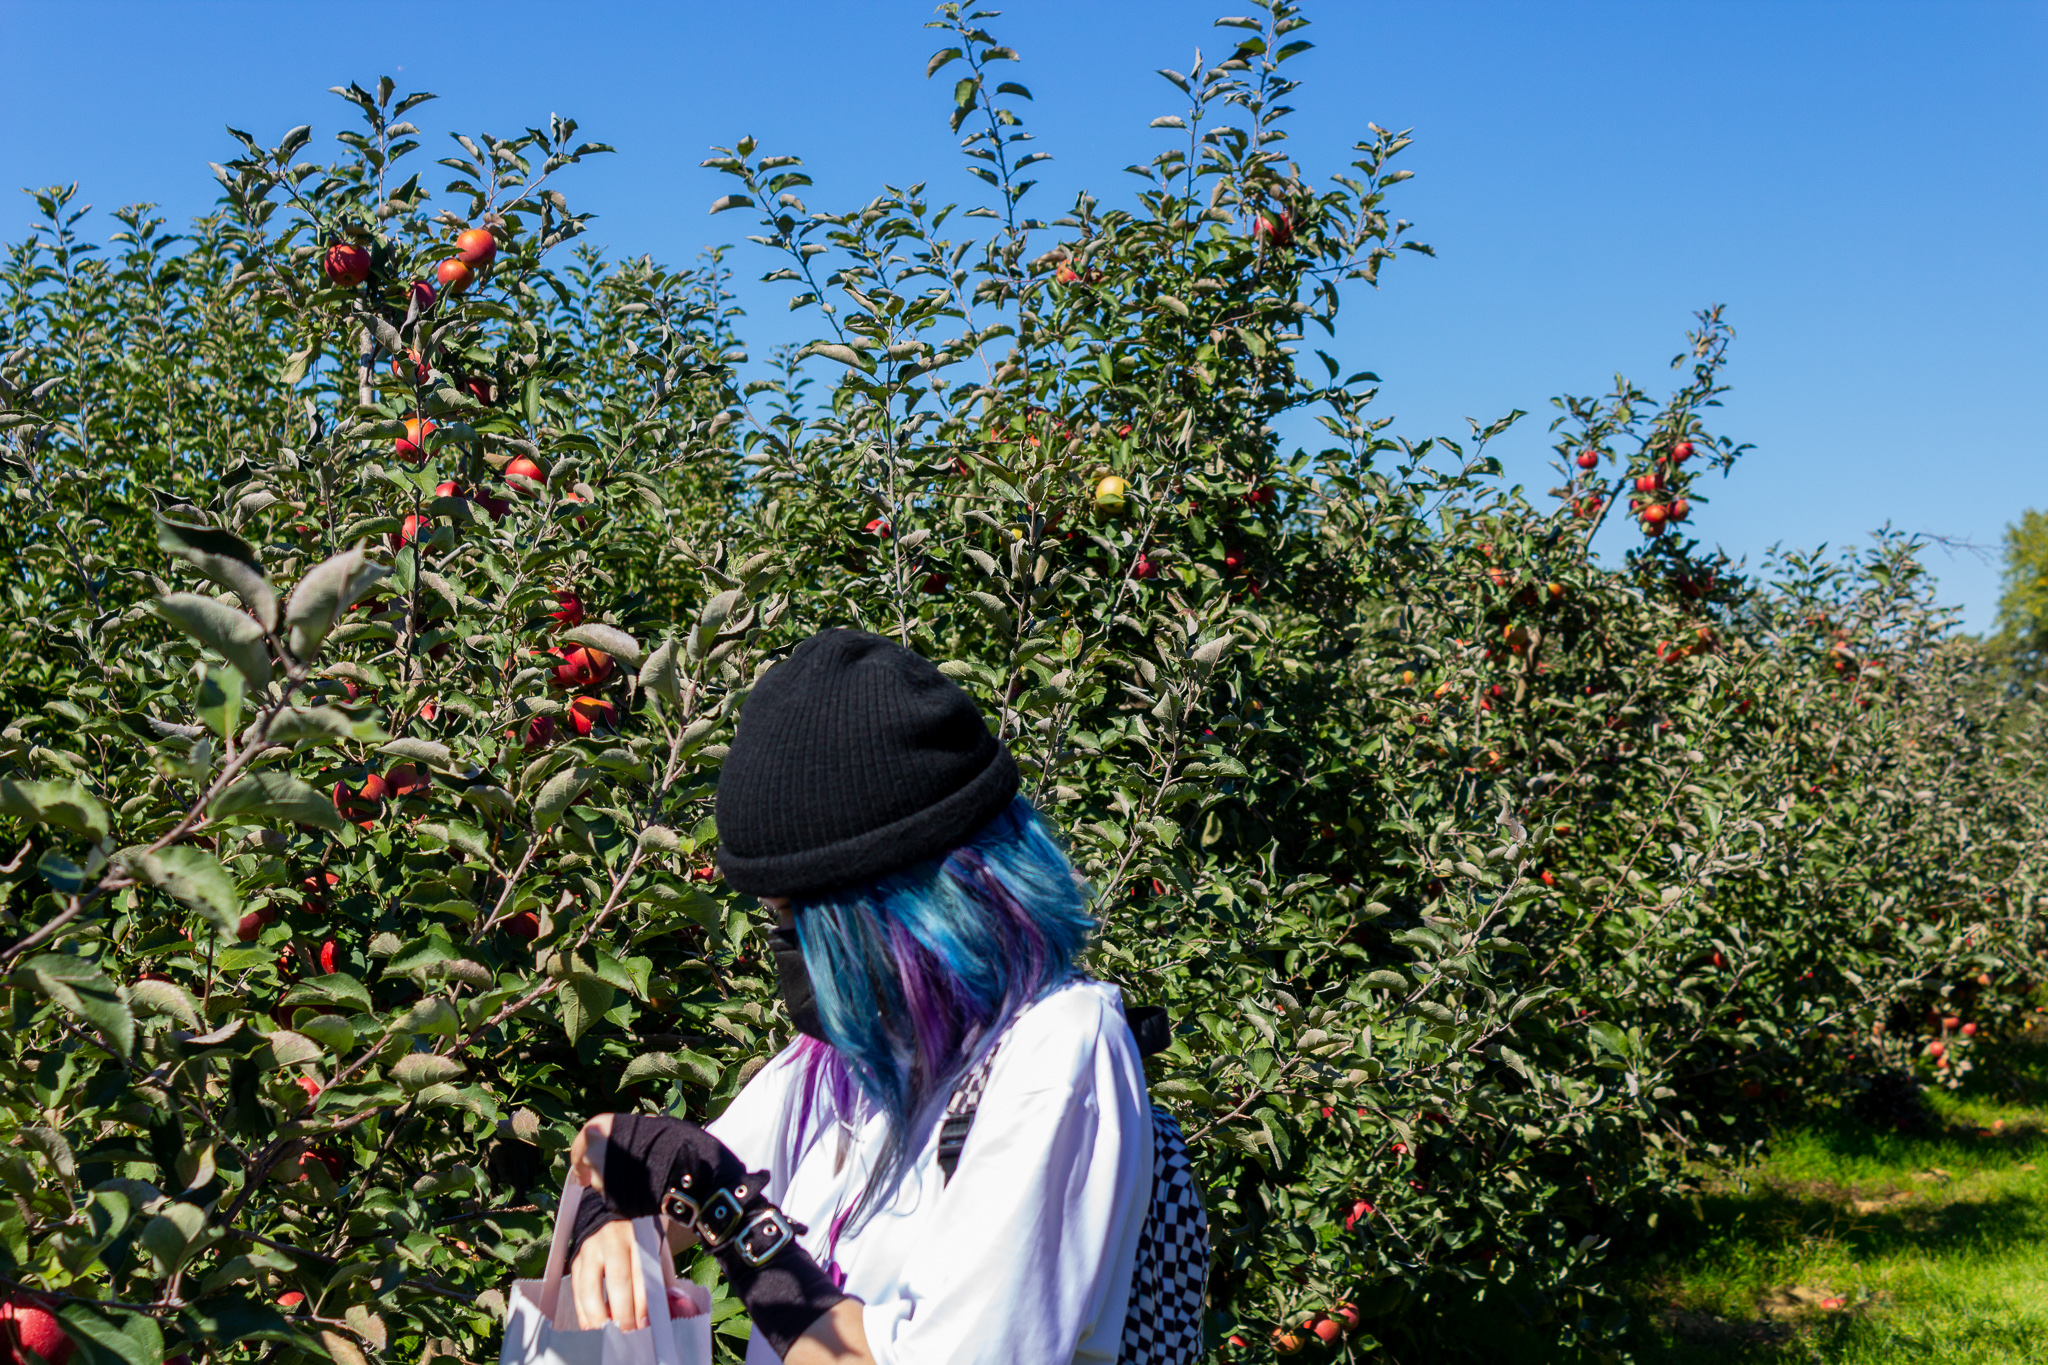 A girl wearing a black cap over blue- and purple-dyed hair puts an apple into a bag in front of a line of green apple trees dotted with red apples under a blue sky